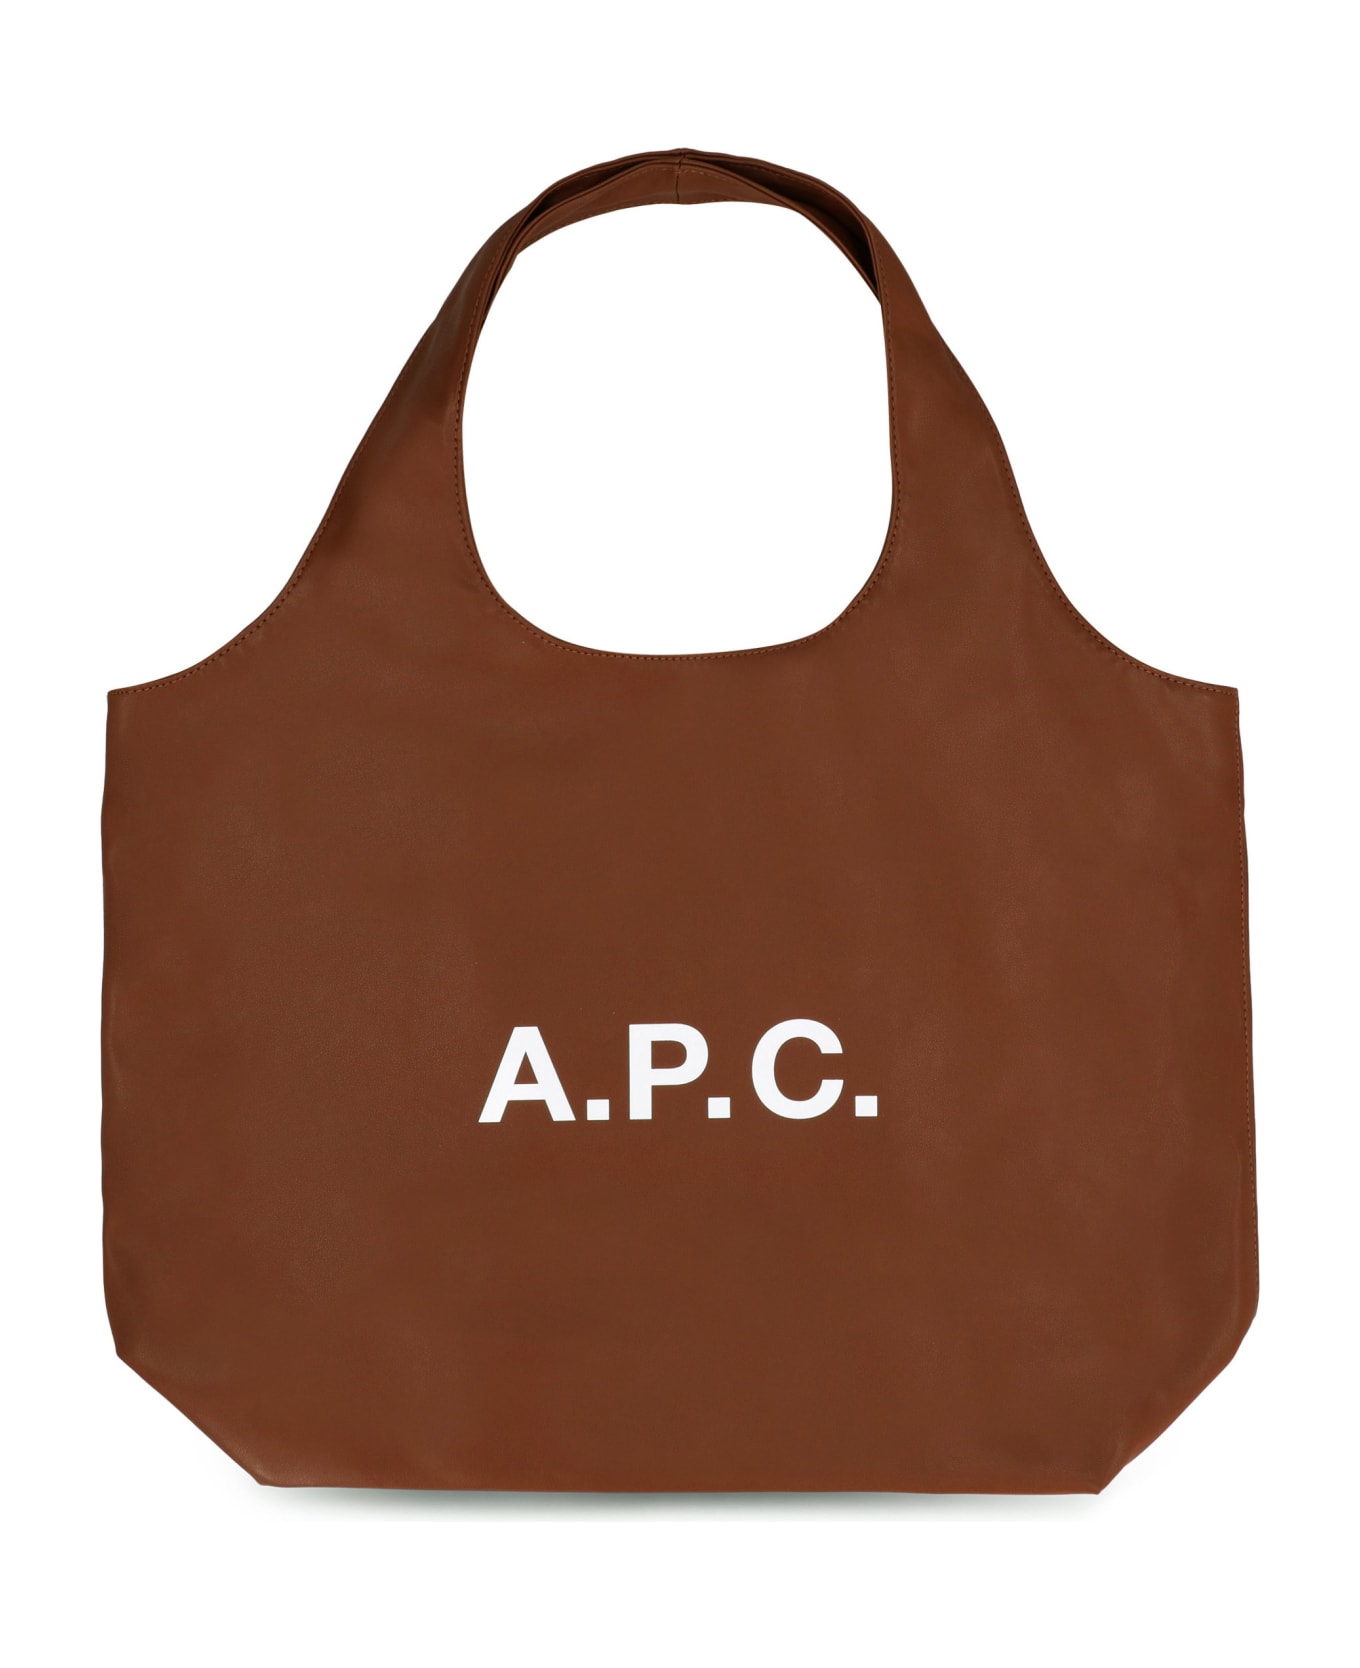 A.P.C. Vegan Leather Tote - brown トートバッグ